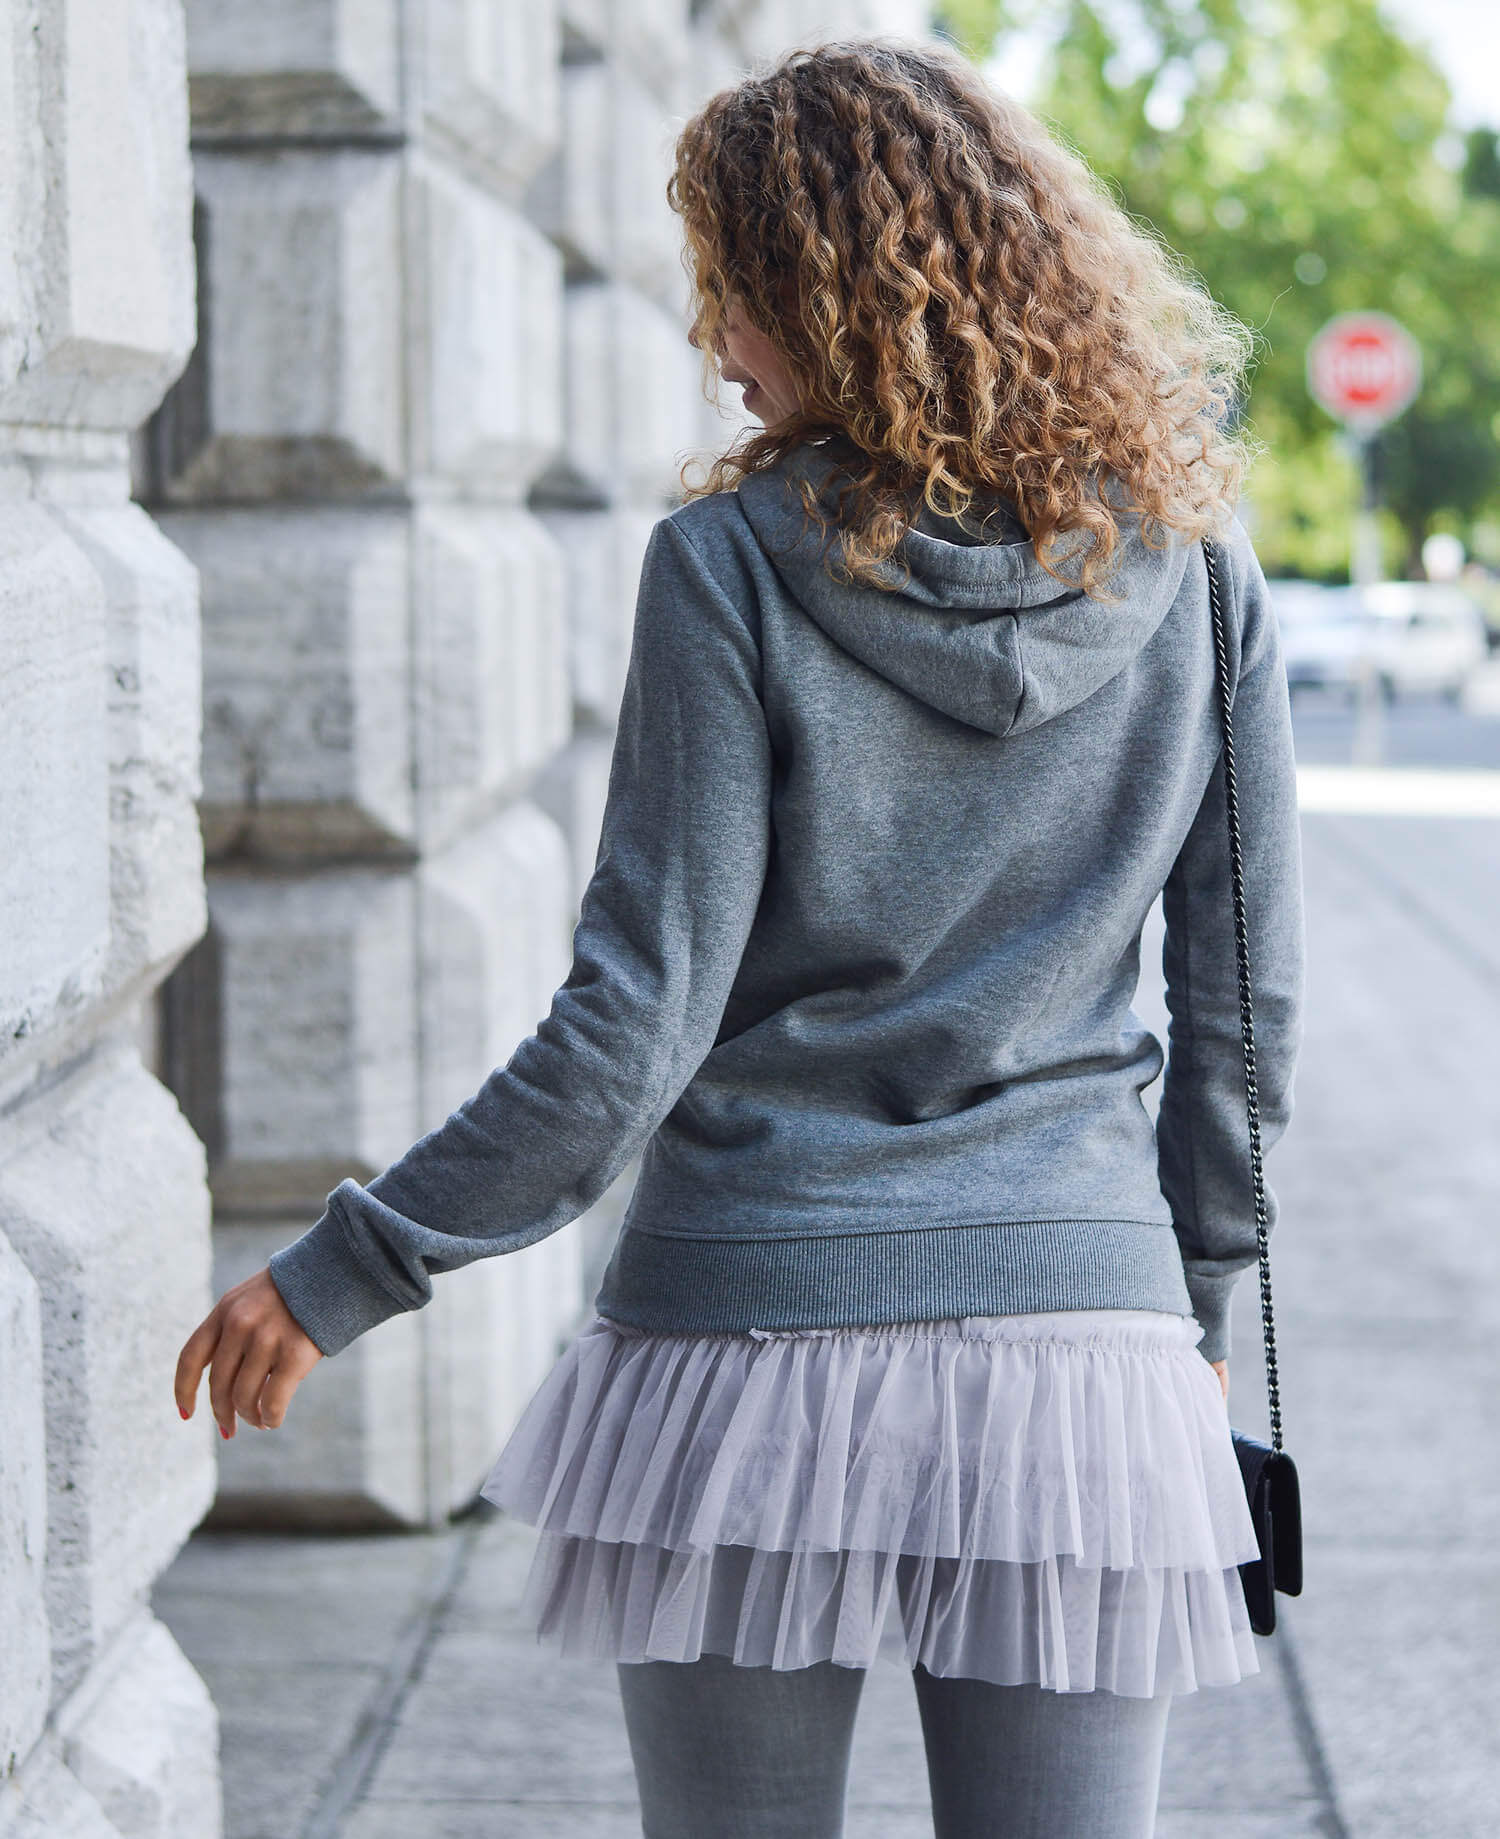 Kationette-fashionblog-nrw-Outfit-Allgrey-with-Carrie-Bradshaw-SATC-Tulle-Skirt-Statement-Hoodie-Chanel-Wedges